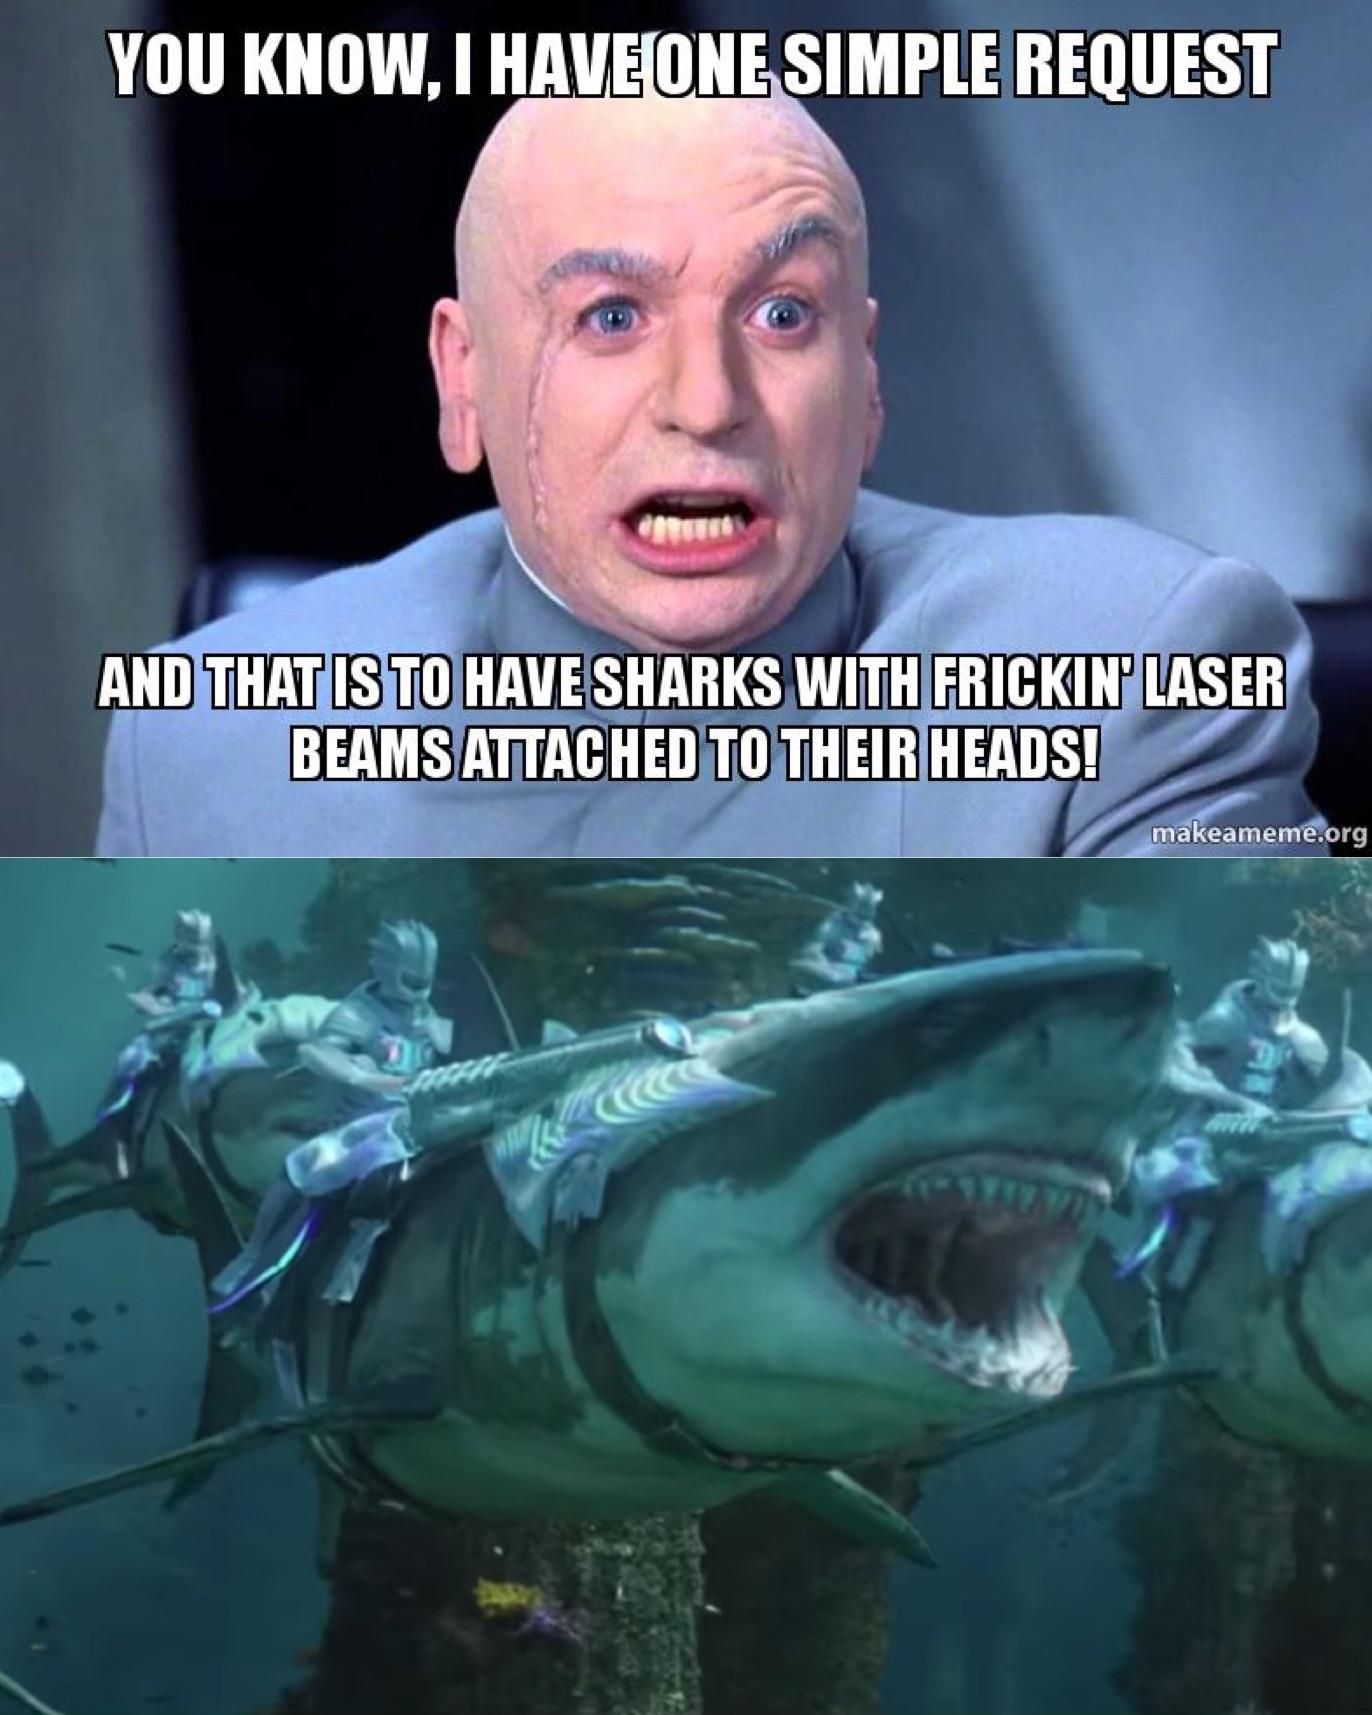 Dr. Evil would be pleased with the new Aquaman movie